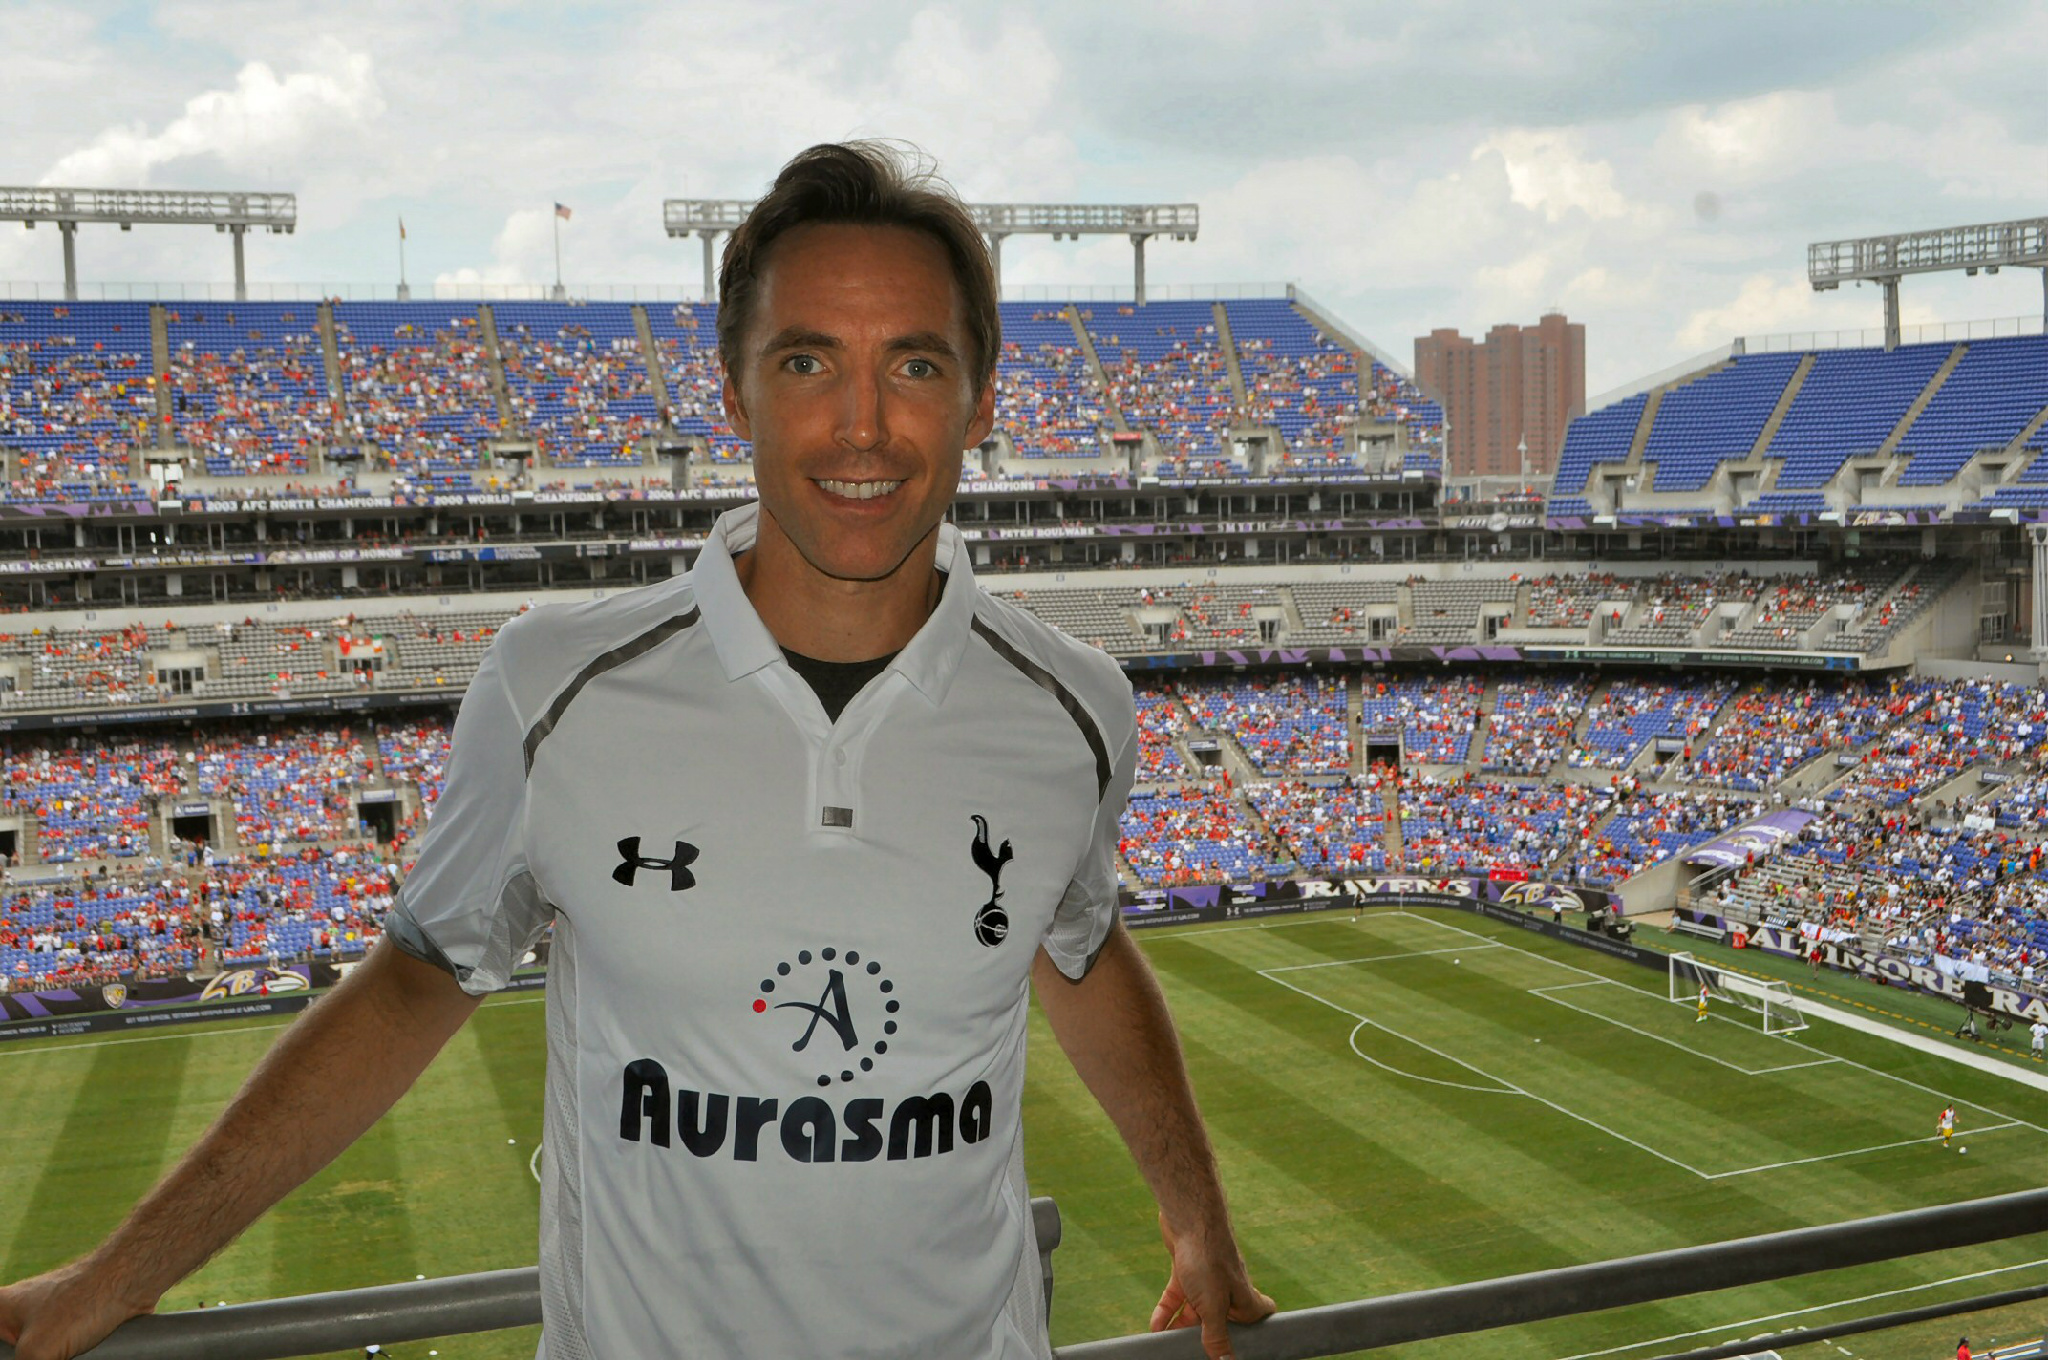 Tottenham Hotspur Al Twitter Picture Special Nba Legend And Spurs Fan Stevenash At Today S Game In Baltimore Great To See You Steve Http T Co 539zgq53 Twitter